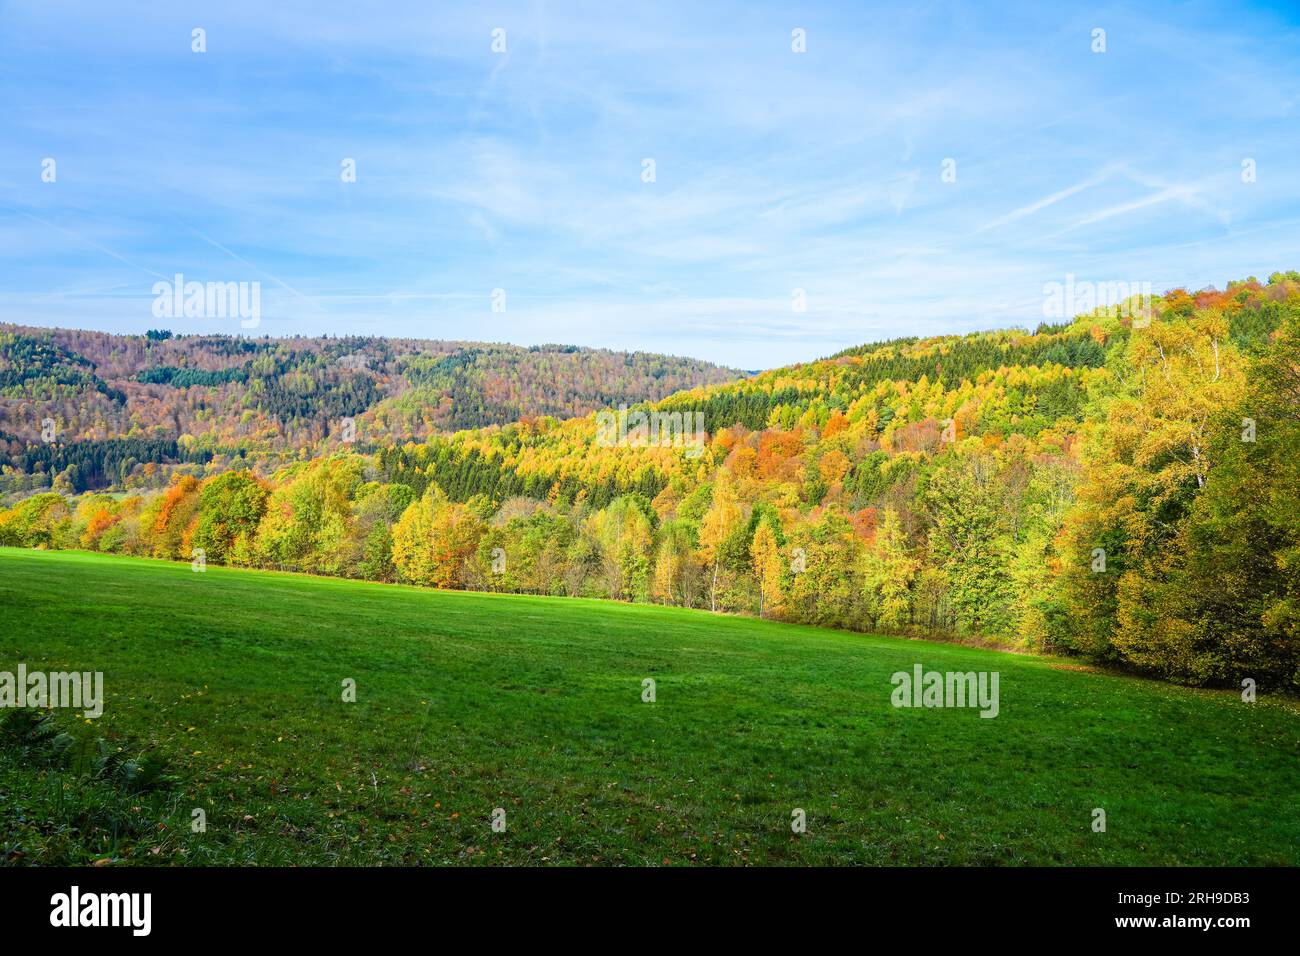 View of nature and the Rhön near Riedenberg. Autumn forest in the low mountain range. Stock Photo